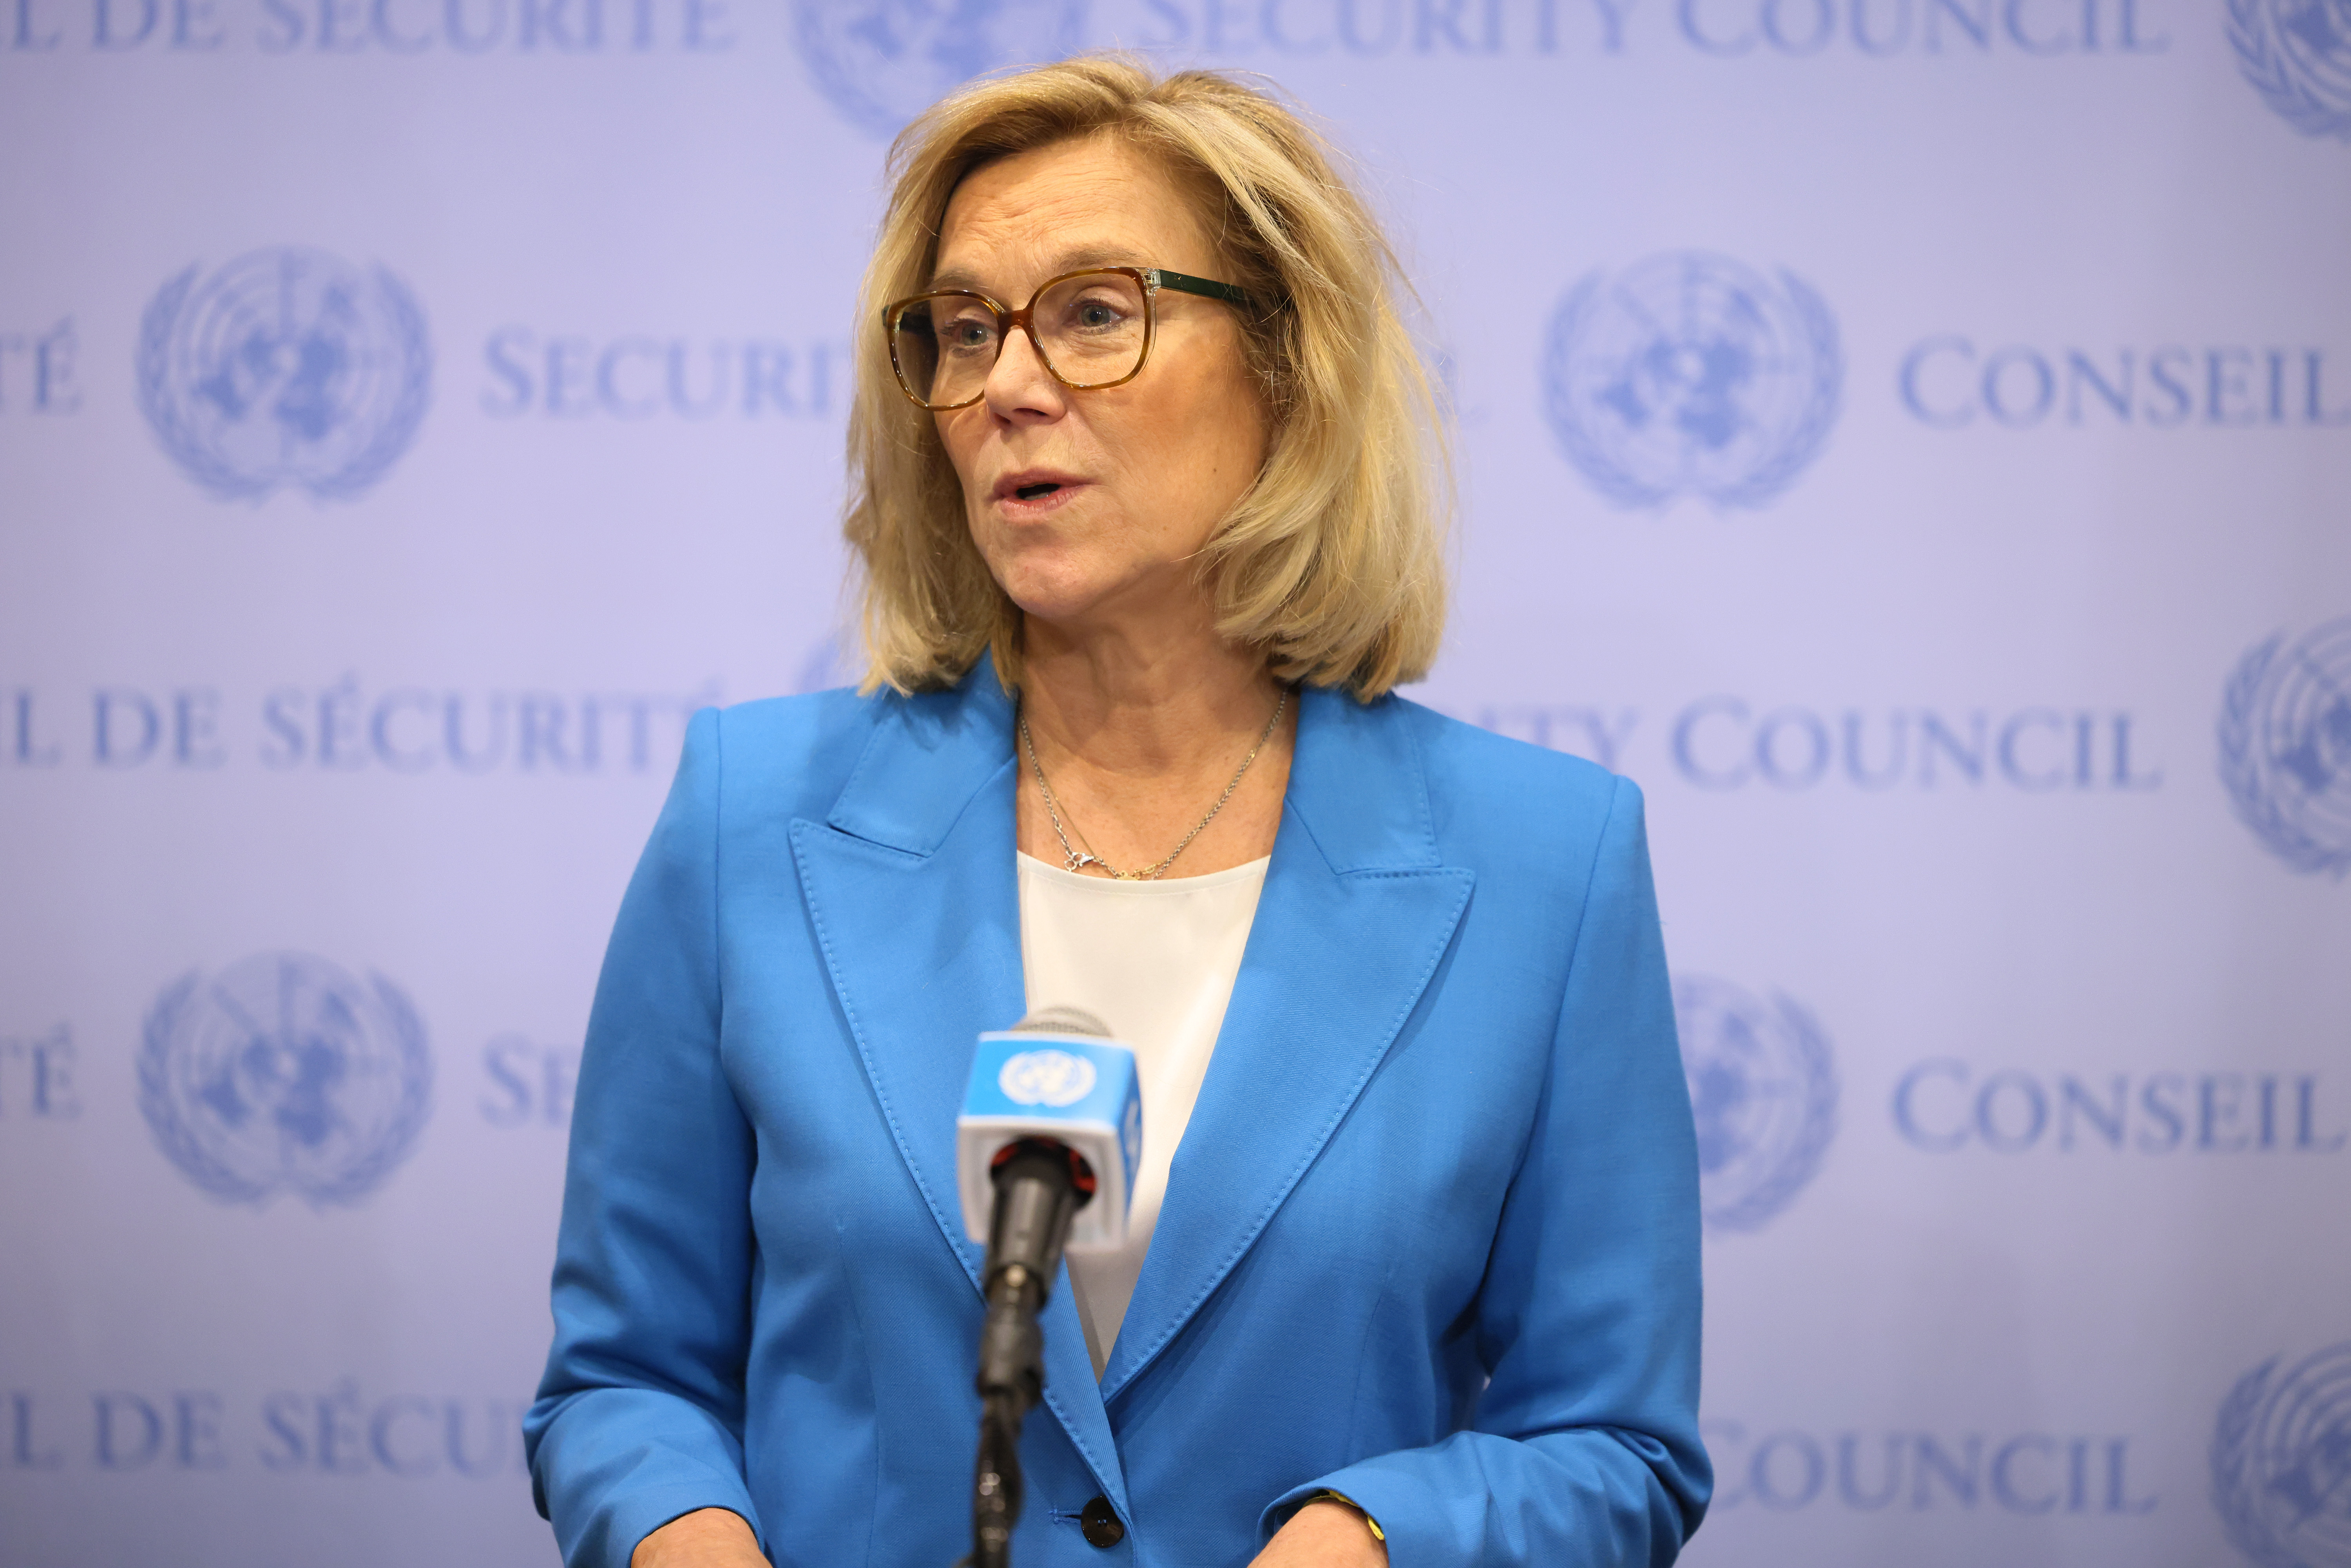 Dutch diplomat Sigrid Kaag speaks during a press conference at the United Nations in New York on January 30.